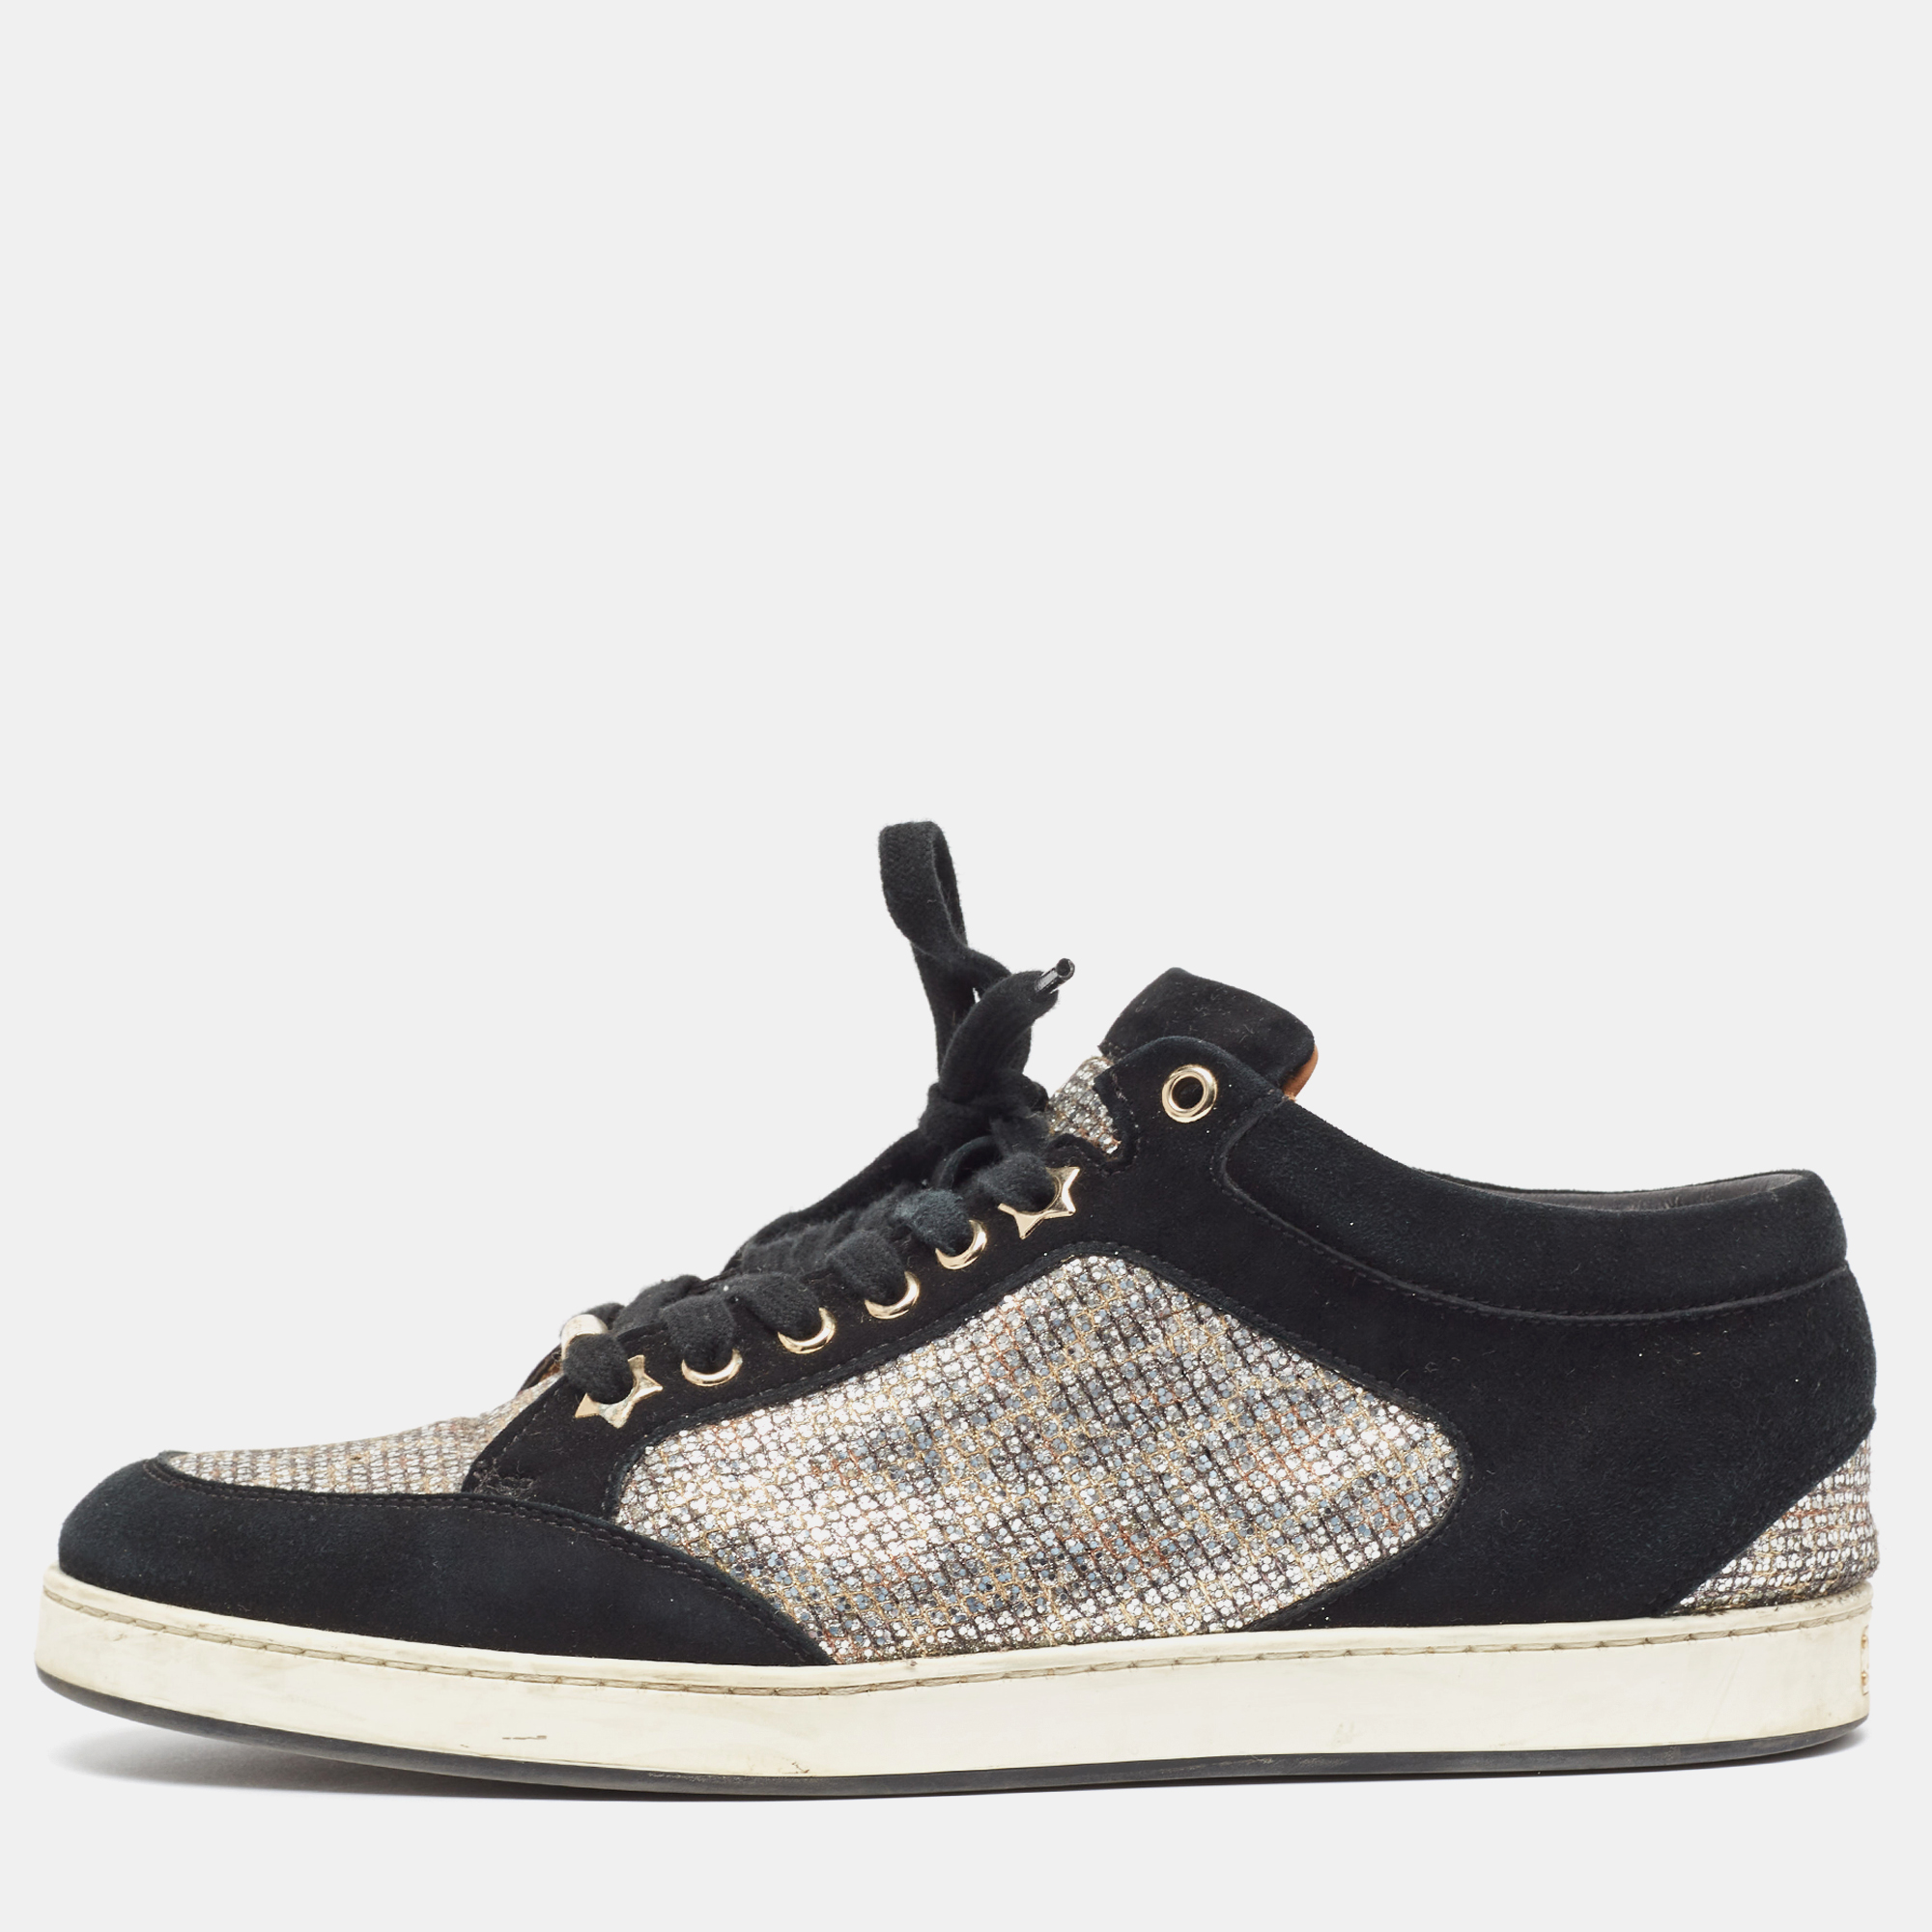 

Jimmy Choo Sliver/Black Suede and Glitter Miami Sneakers Size